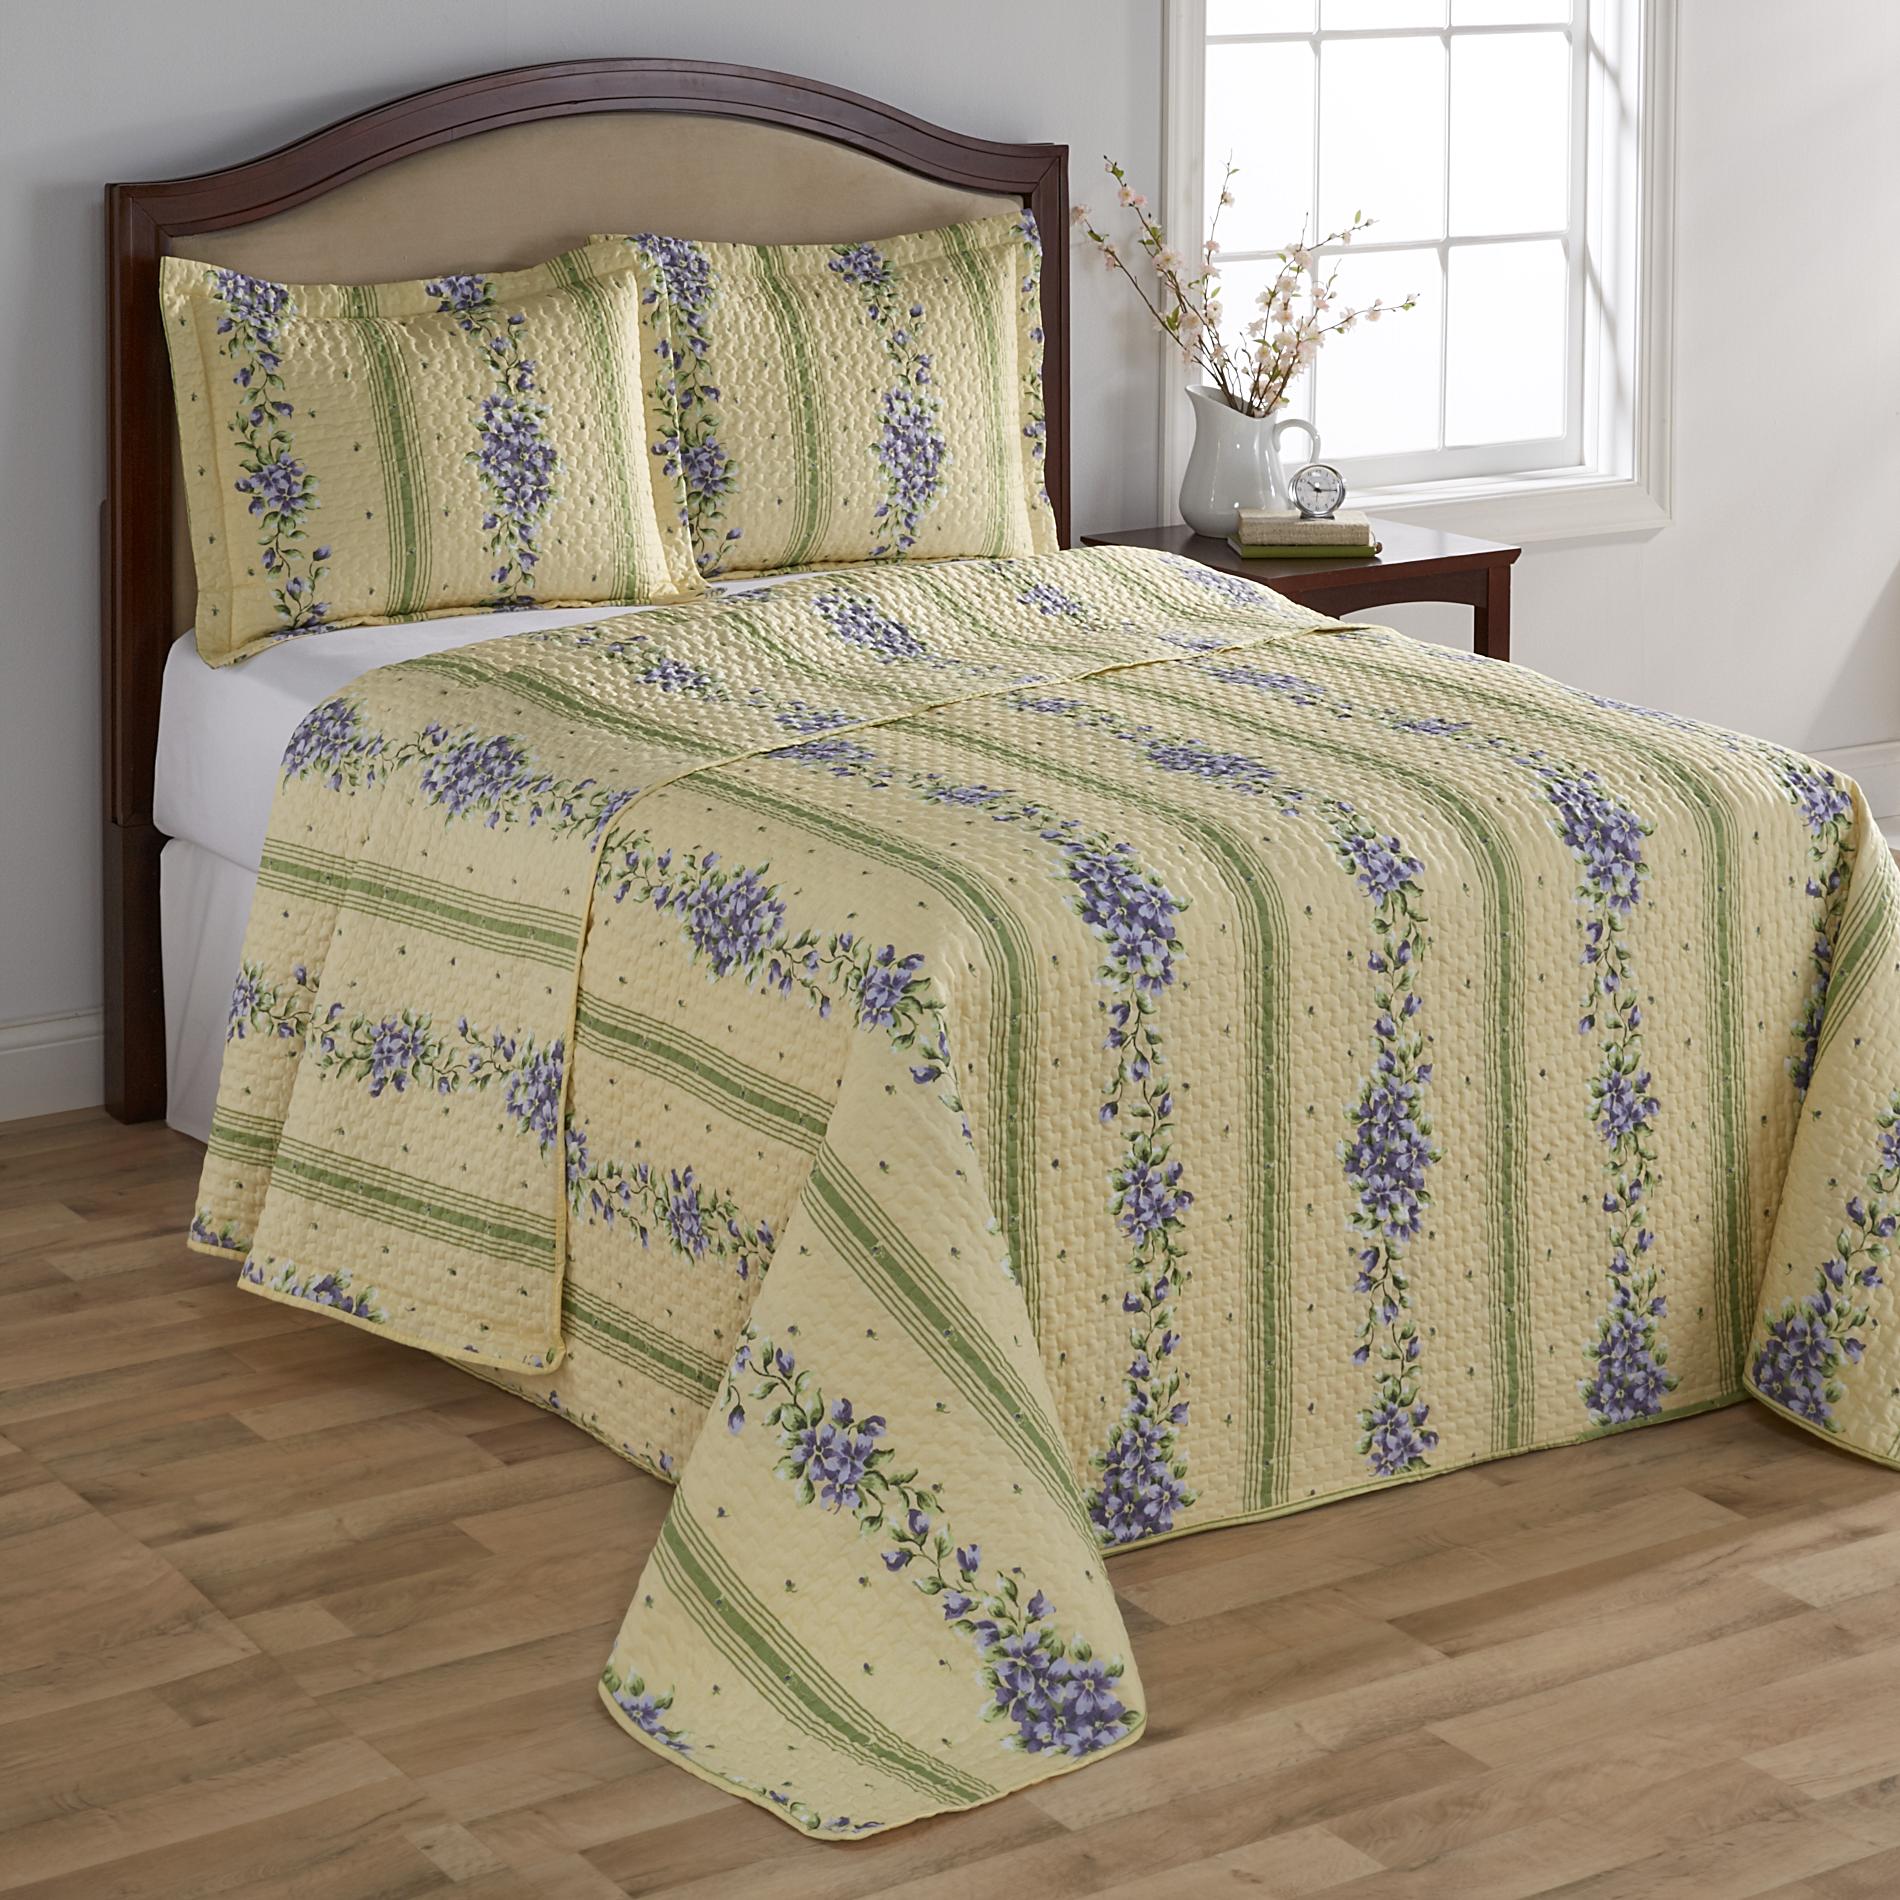 Colormate Bedspread and Shams - Floral Print